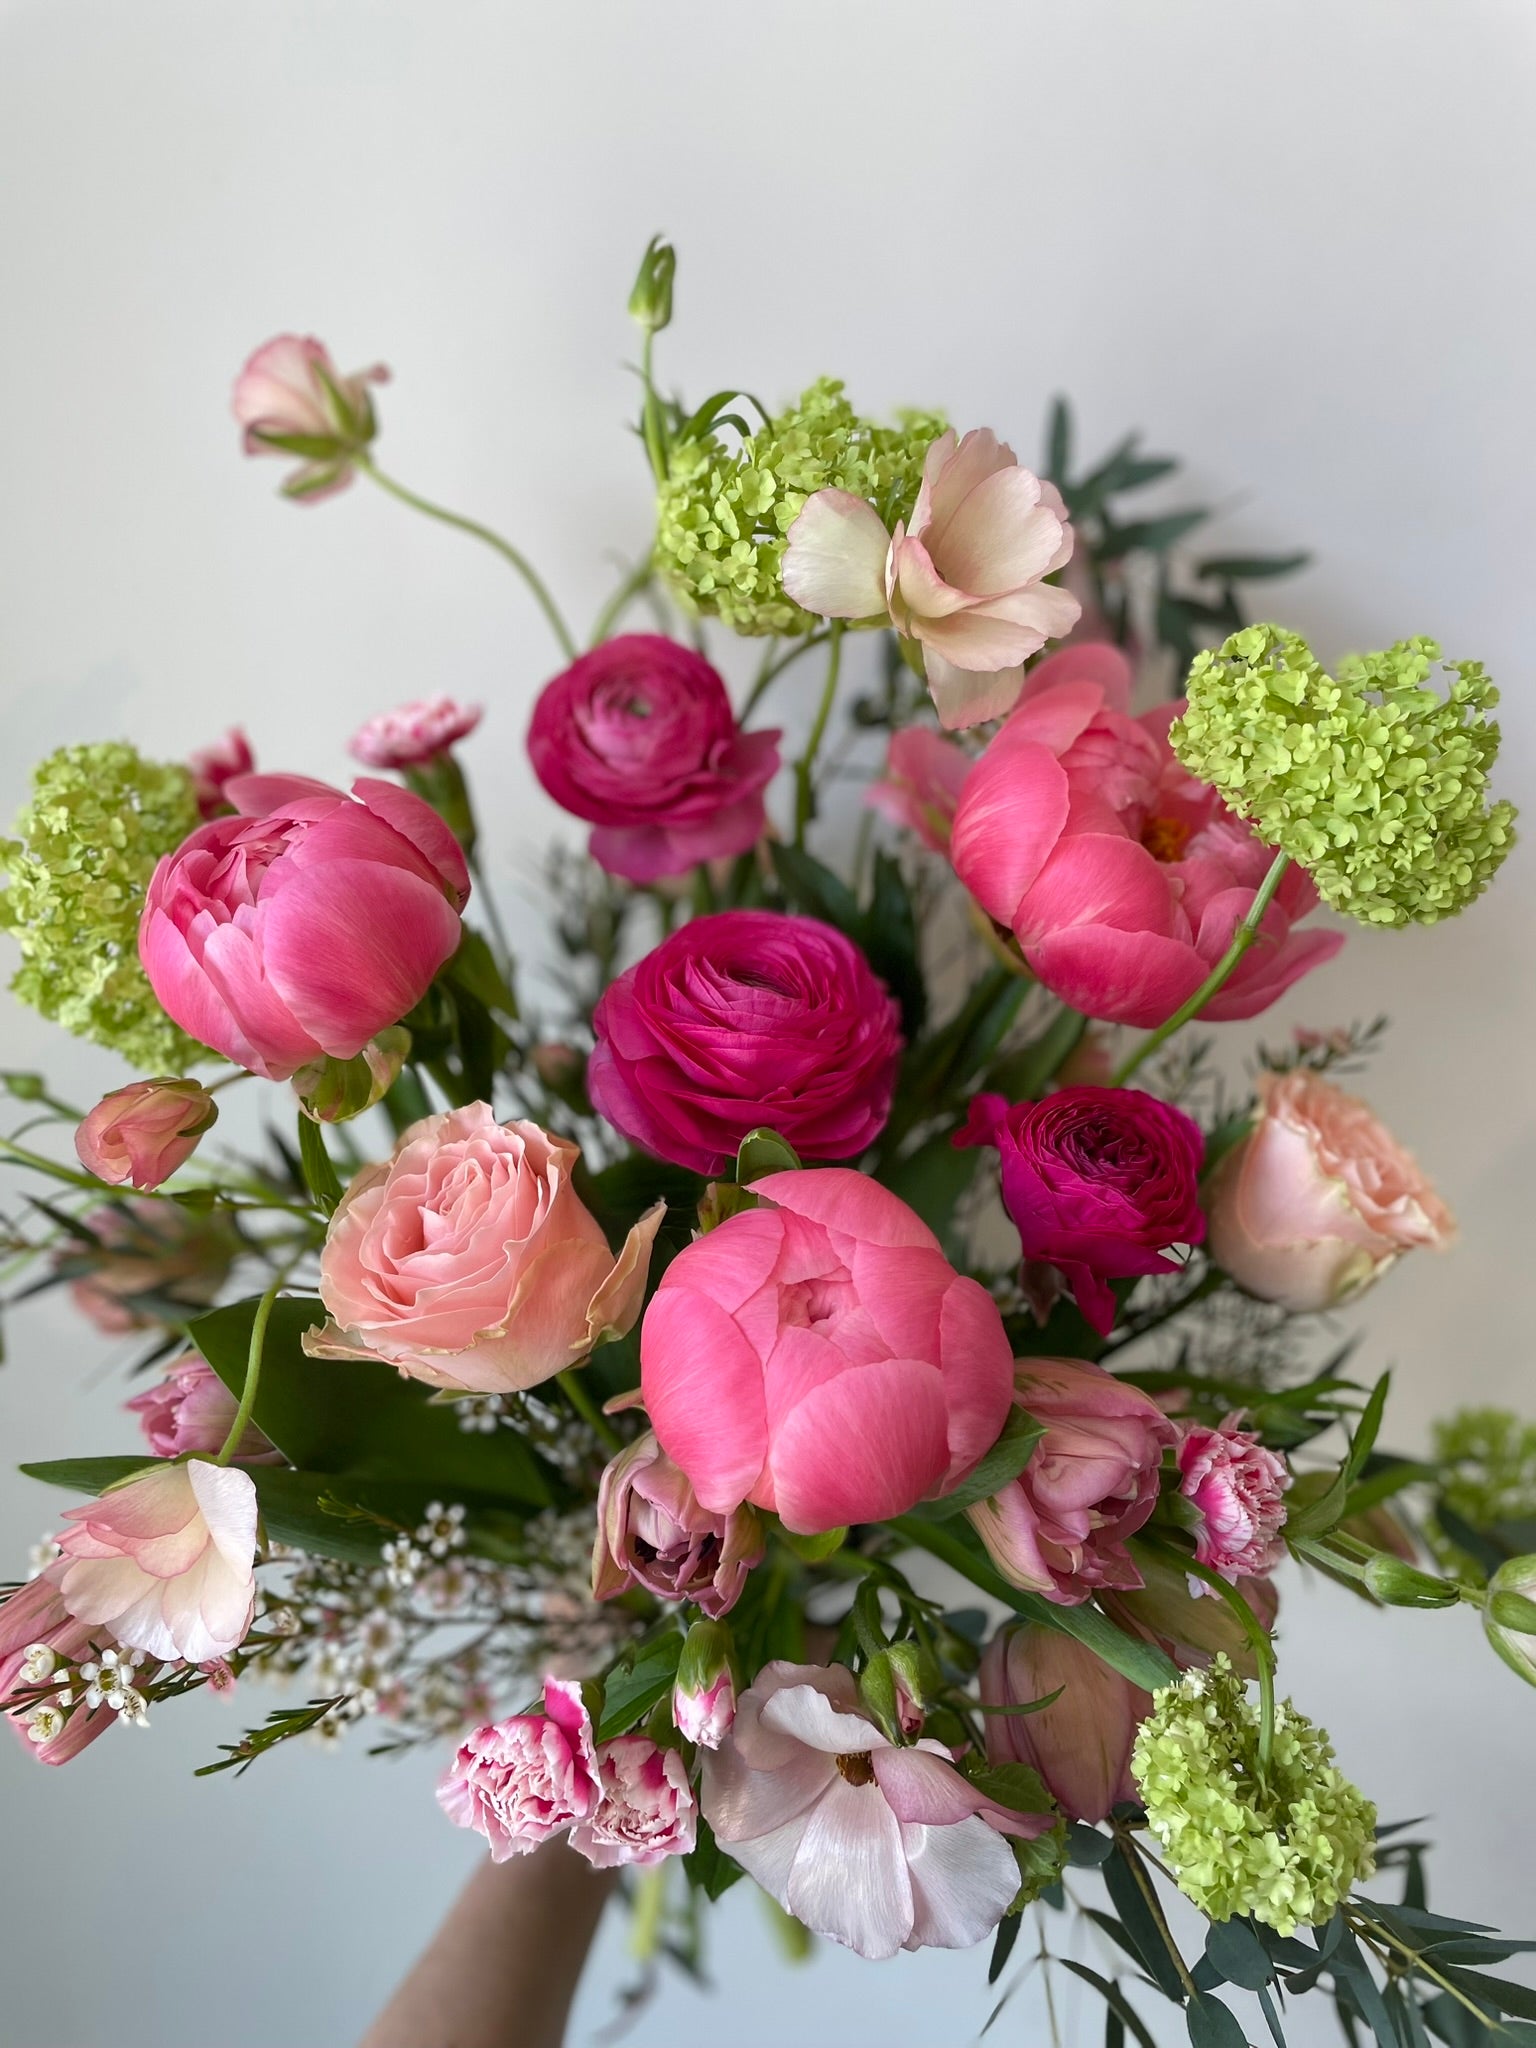 Bouquet of peonies and flowers of the moment, tone of pink